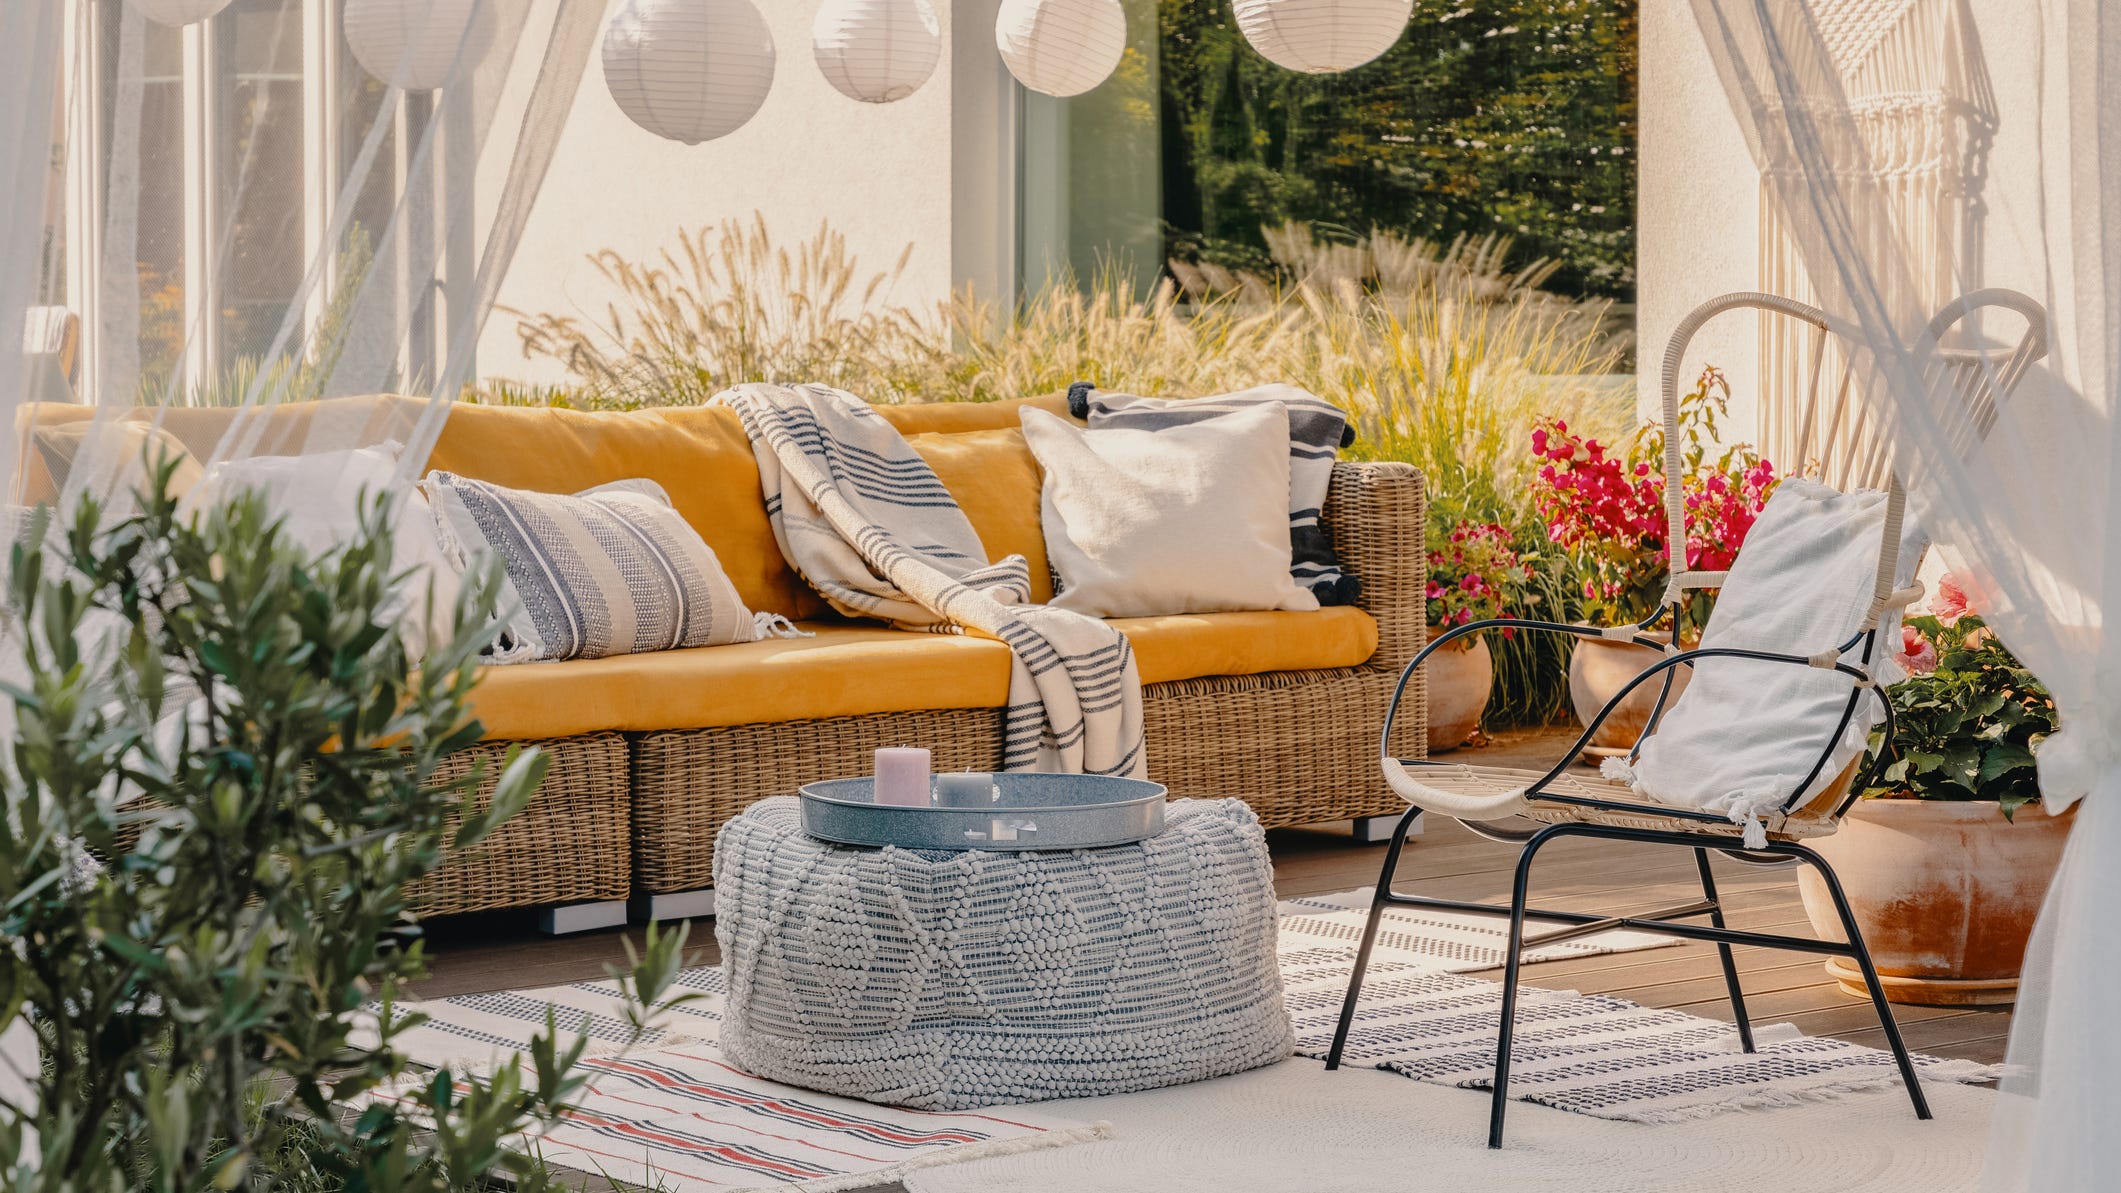 51 Modern Outdoor Chairs To Elevate Views of Your Patio & Garden